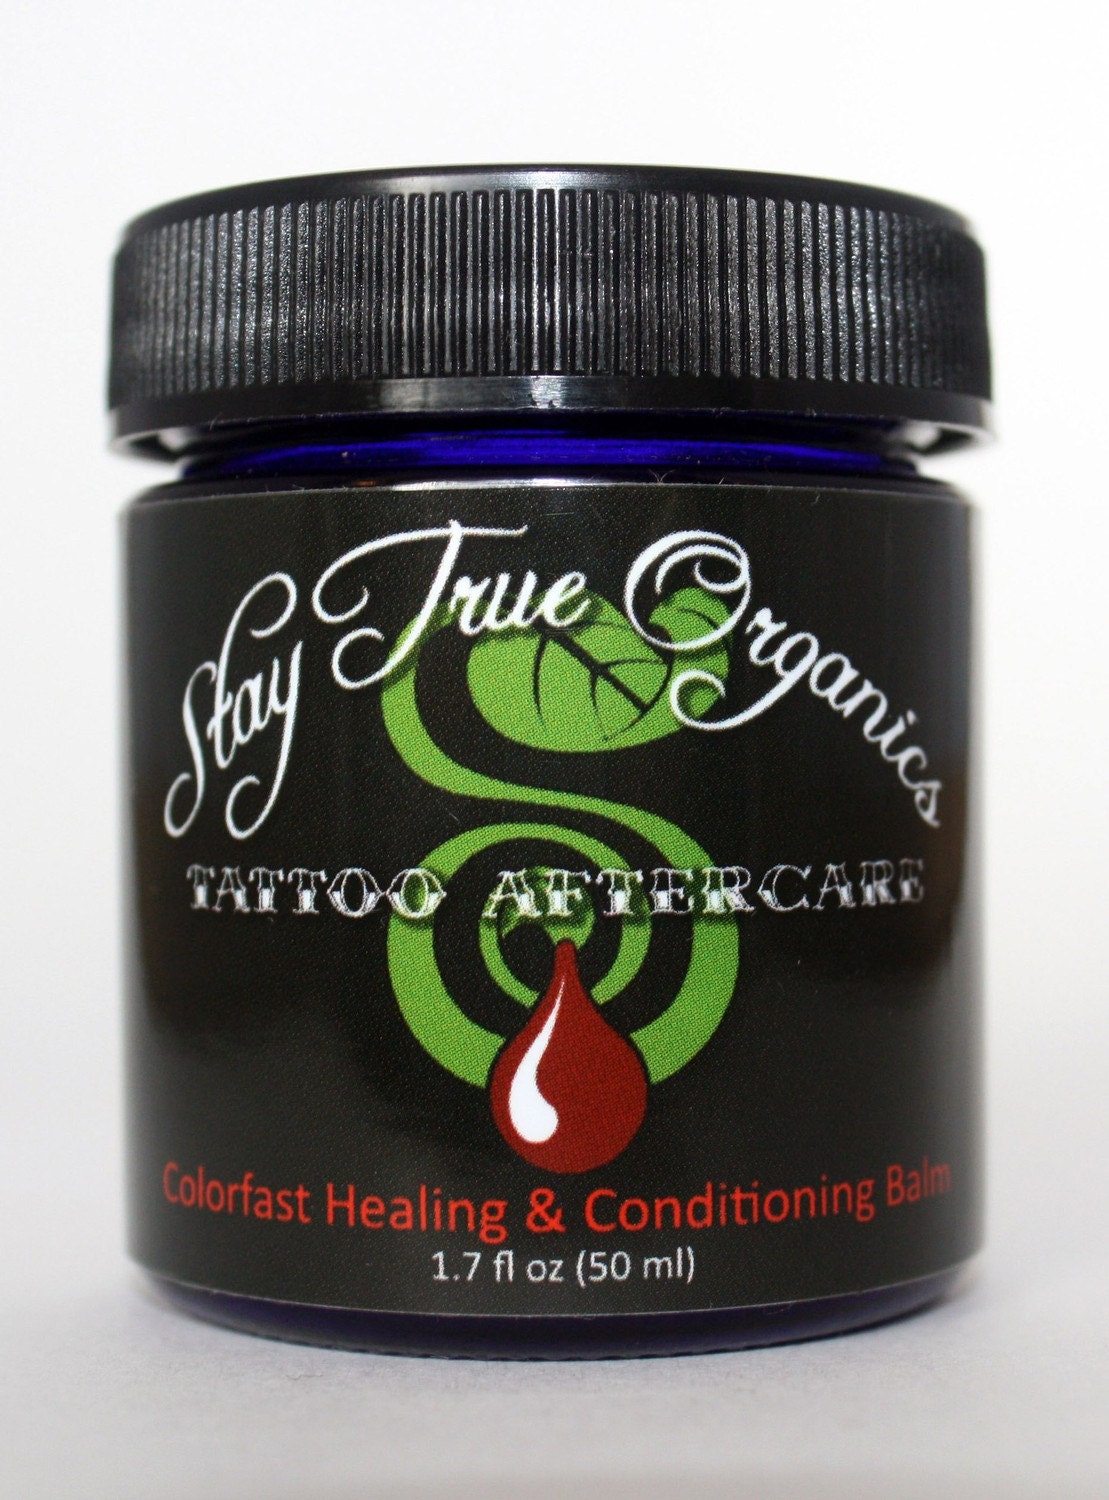 Heals tattoos faster while maintaining their clarity and color.